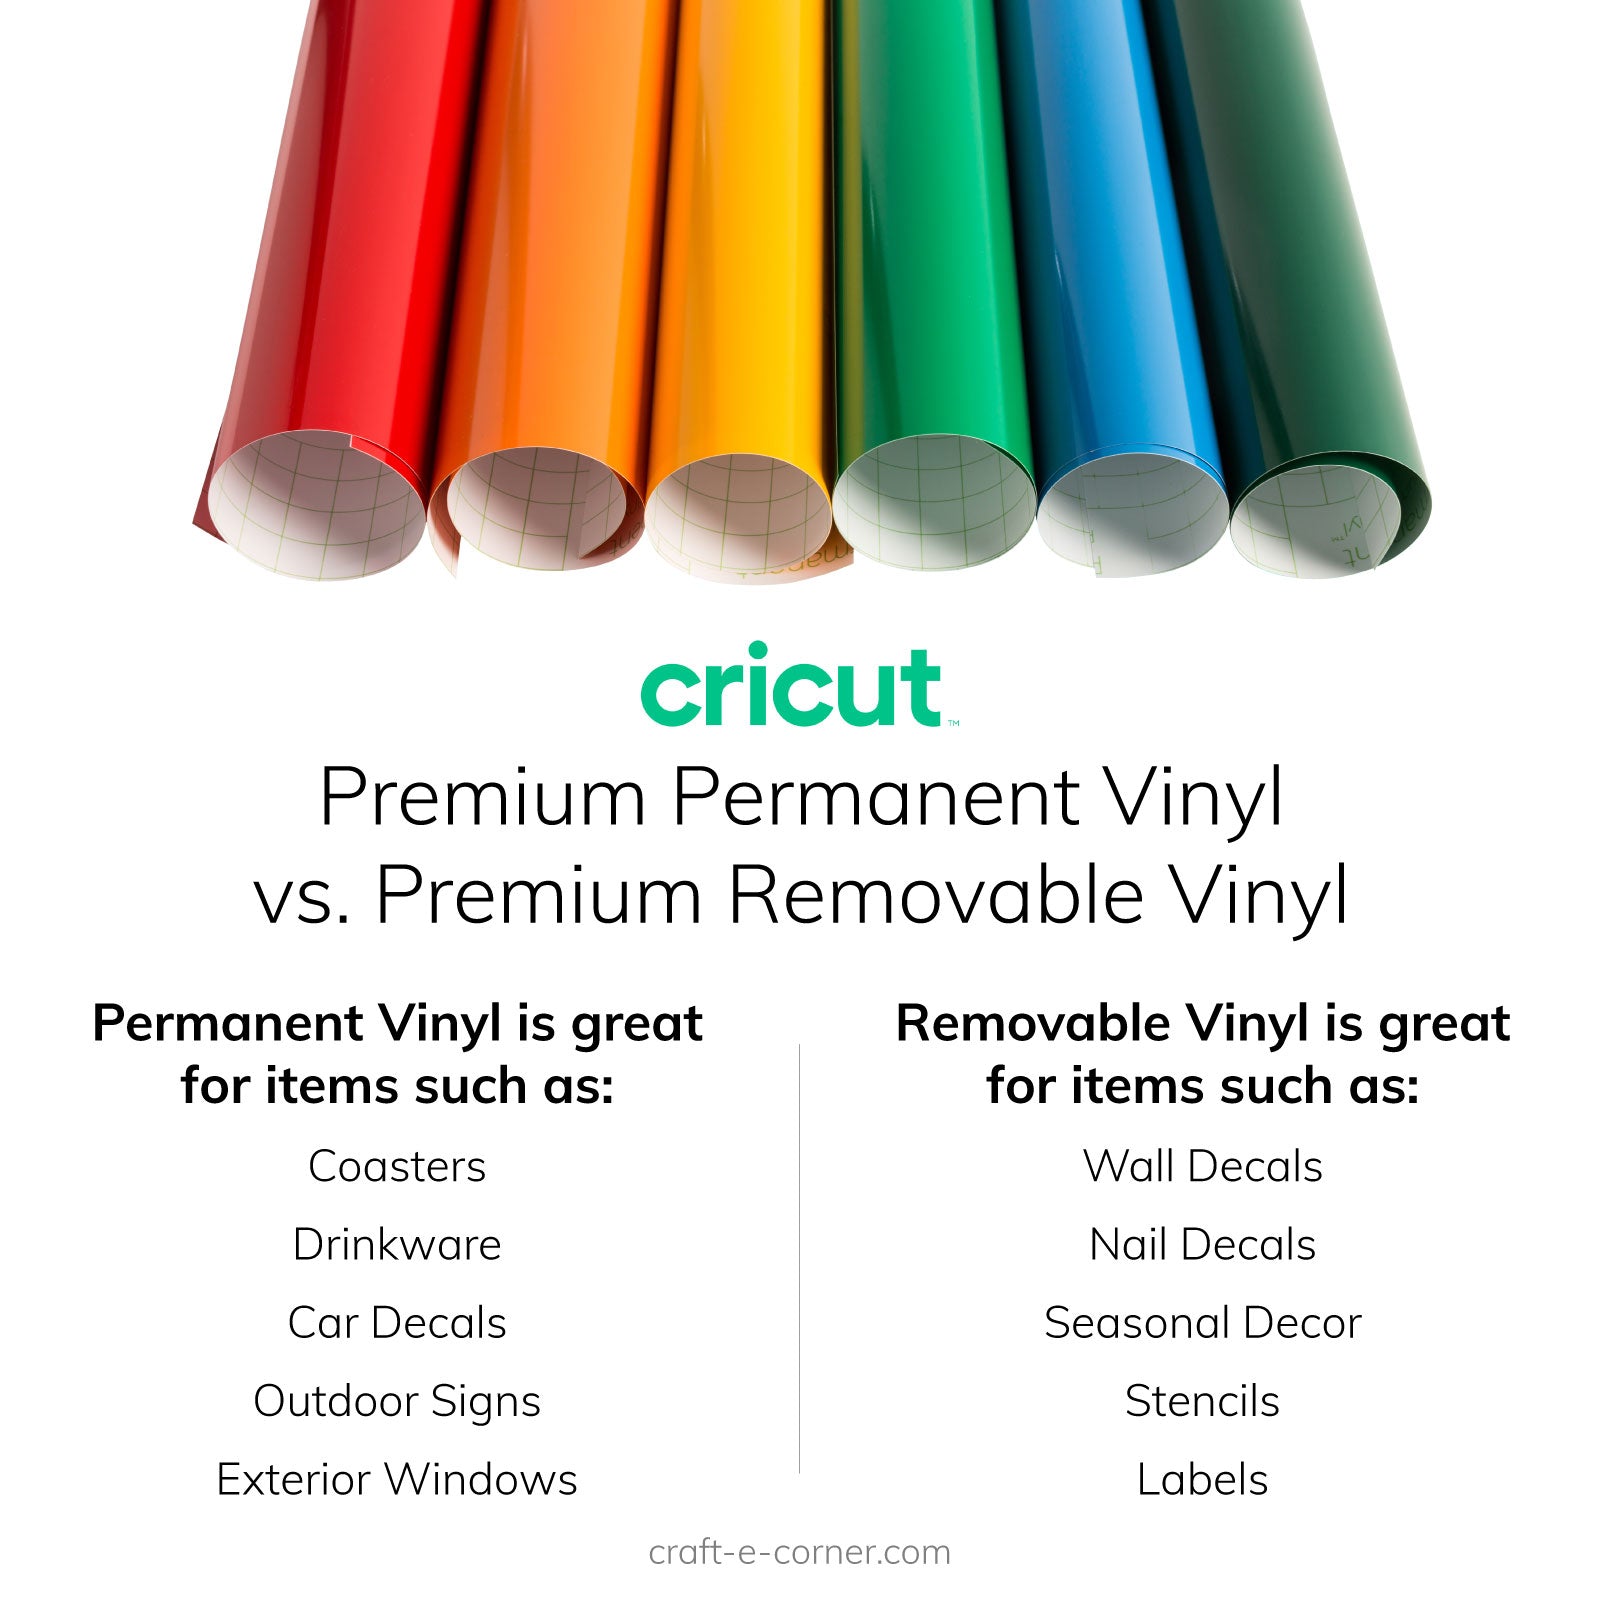 8 Sheets Cricut Adhesive Backed Vinyl With Transfer Paper, Designs and Digital Books